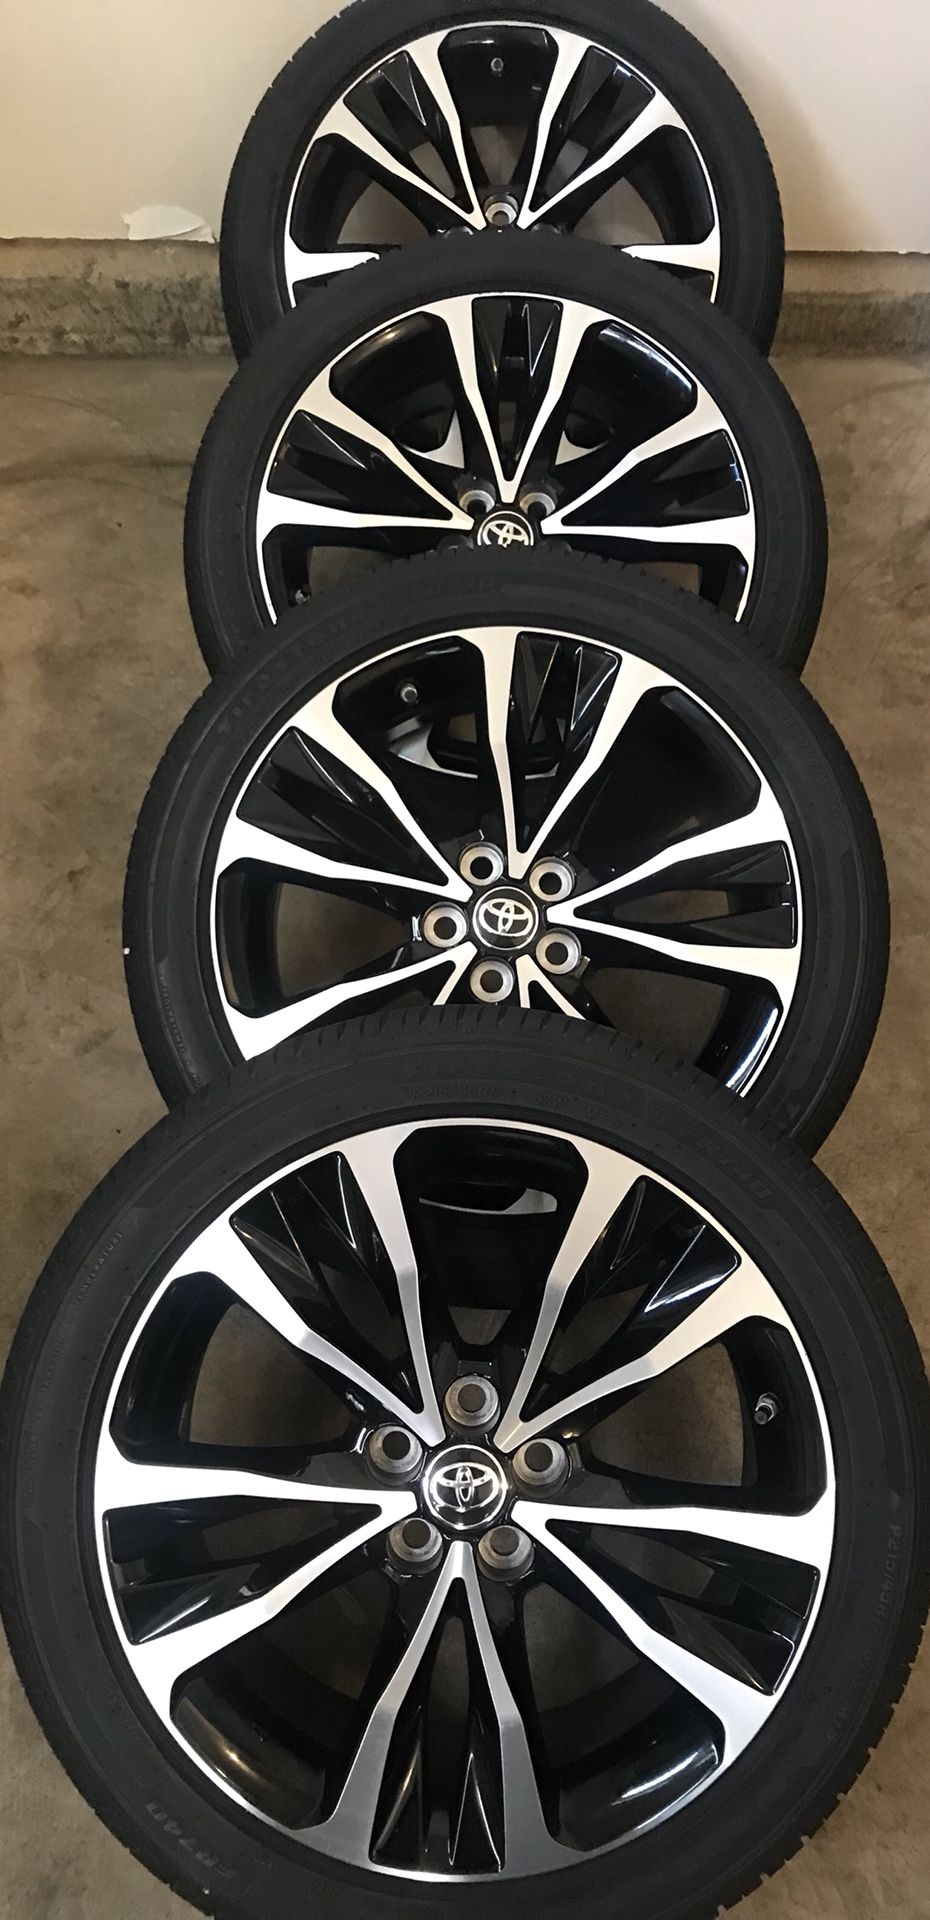 17” Toyota OEM rims and tires